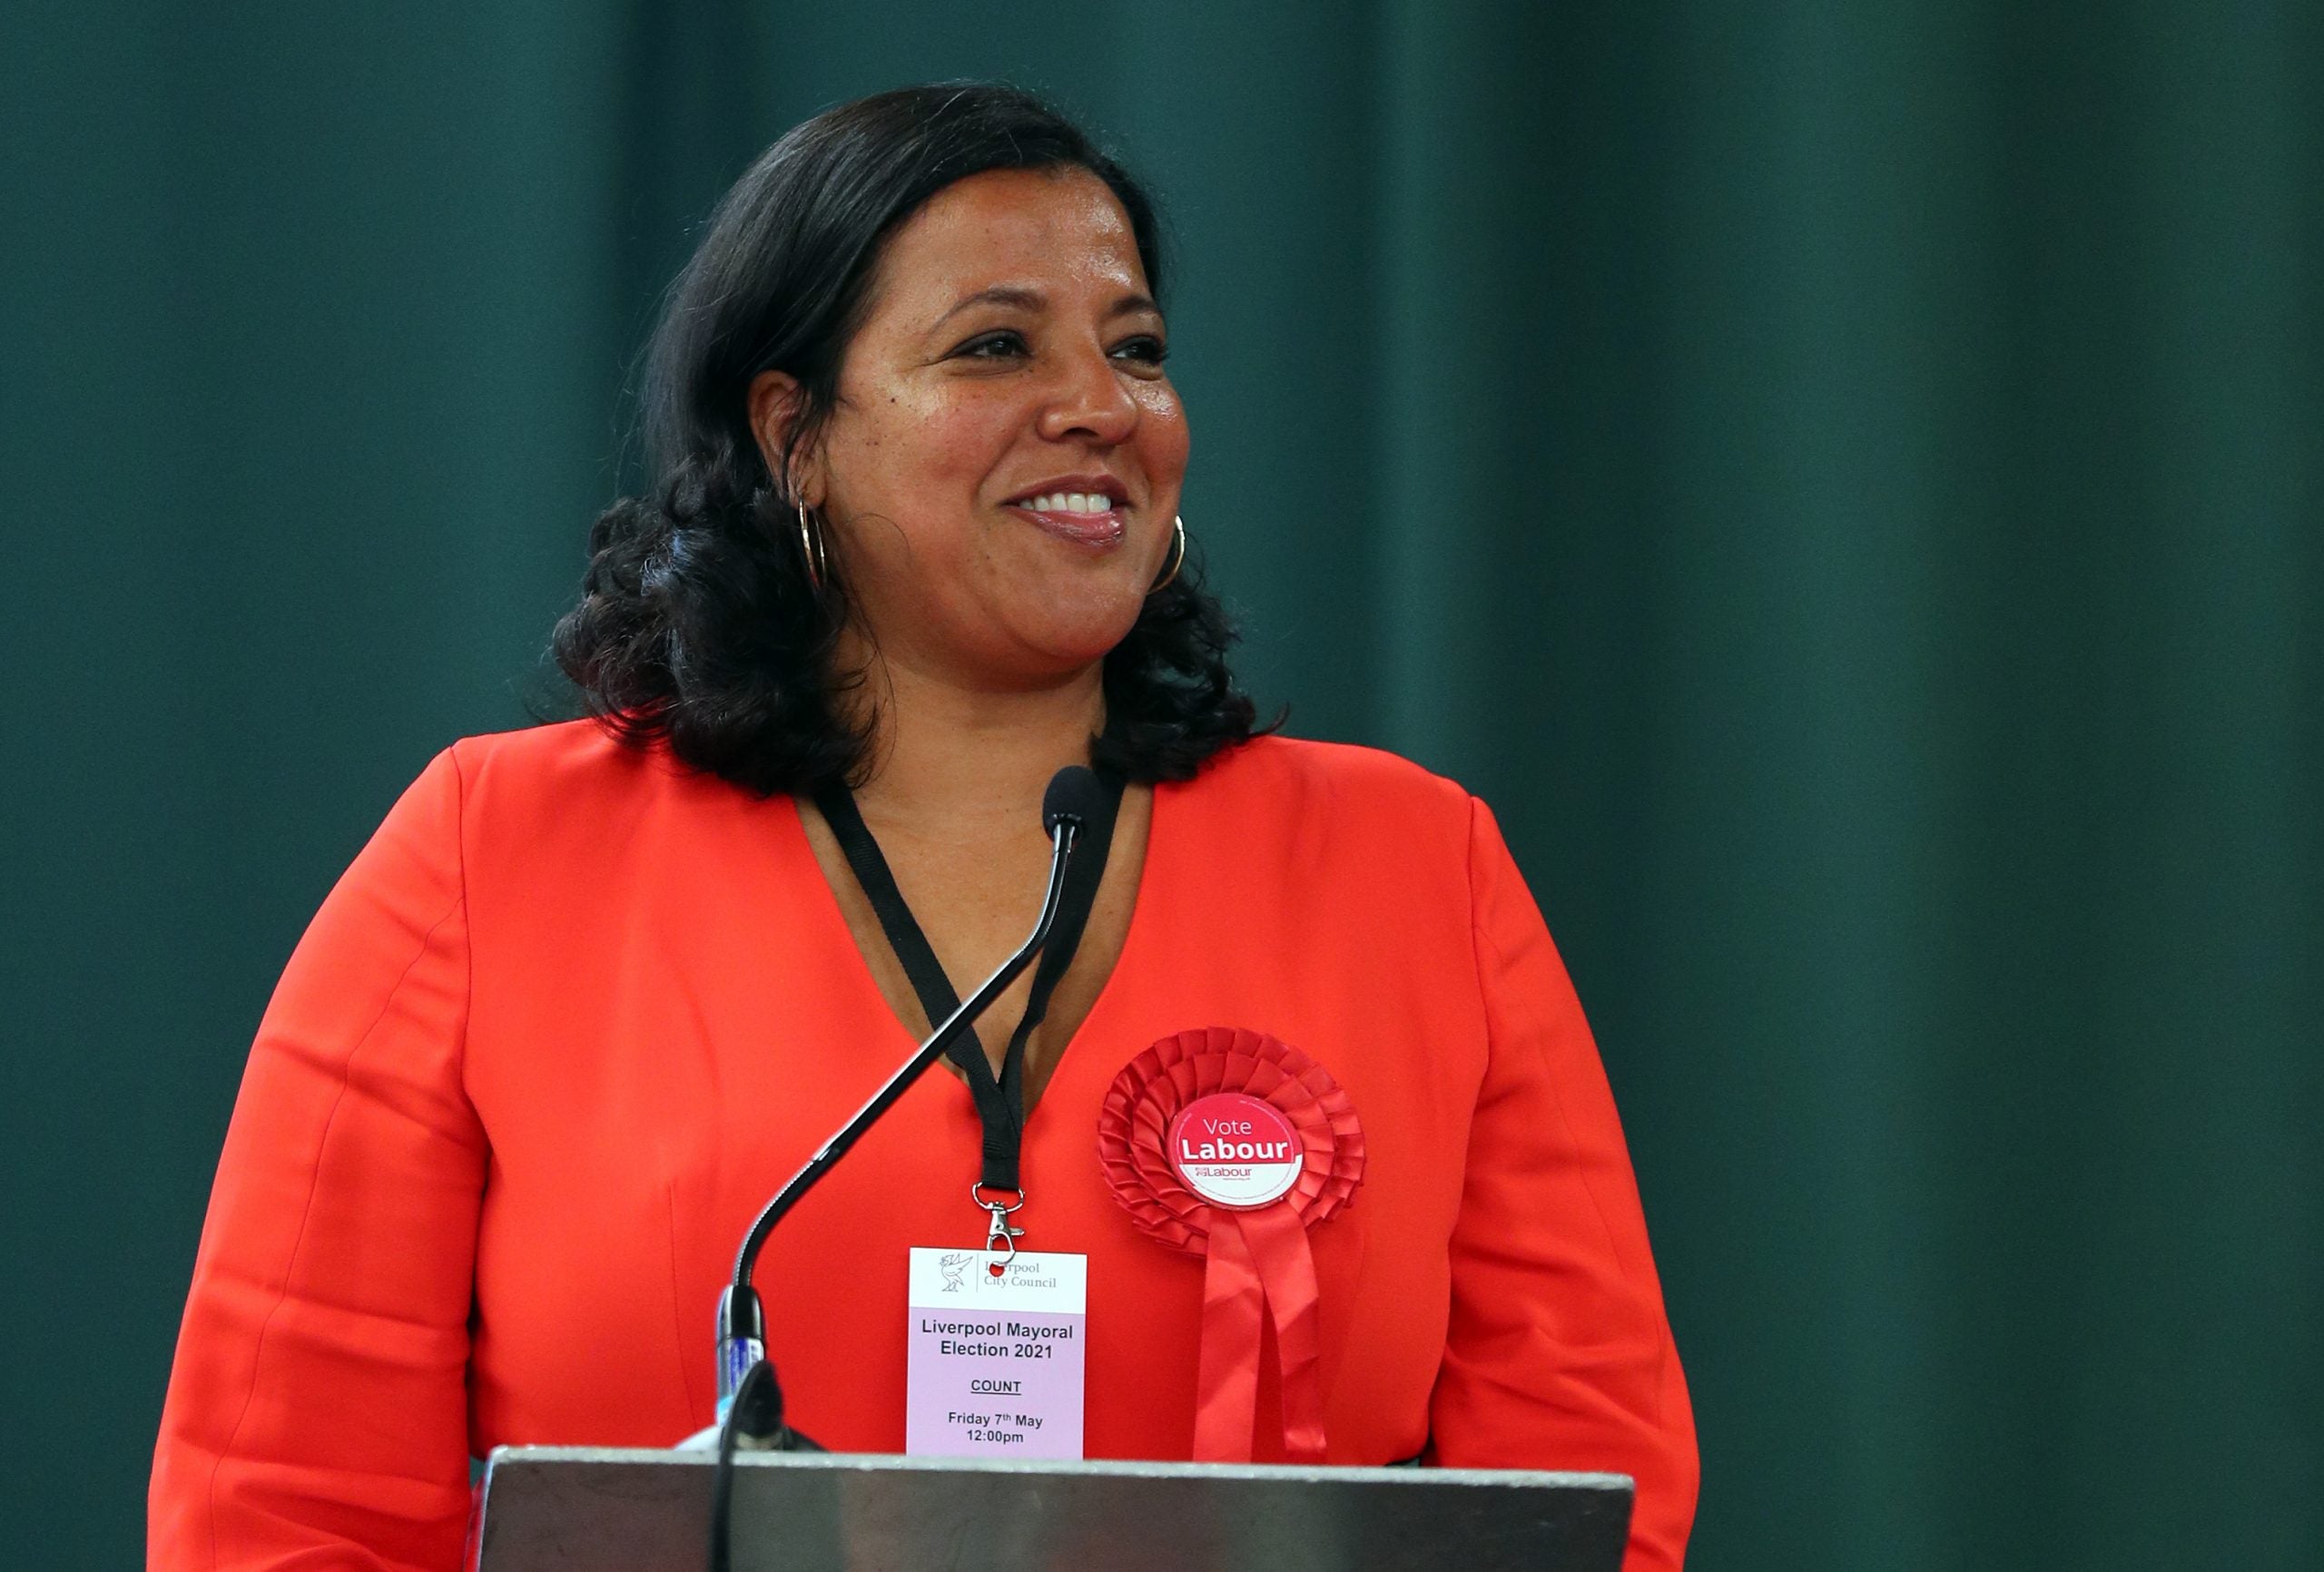 Meet Joanne Anderson. The First Black Woman Elected Mayor of a Major British City.